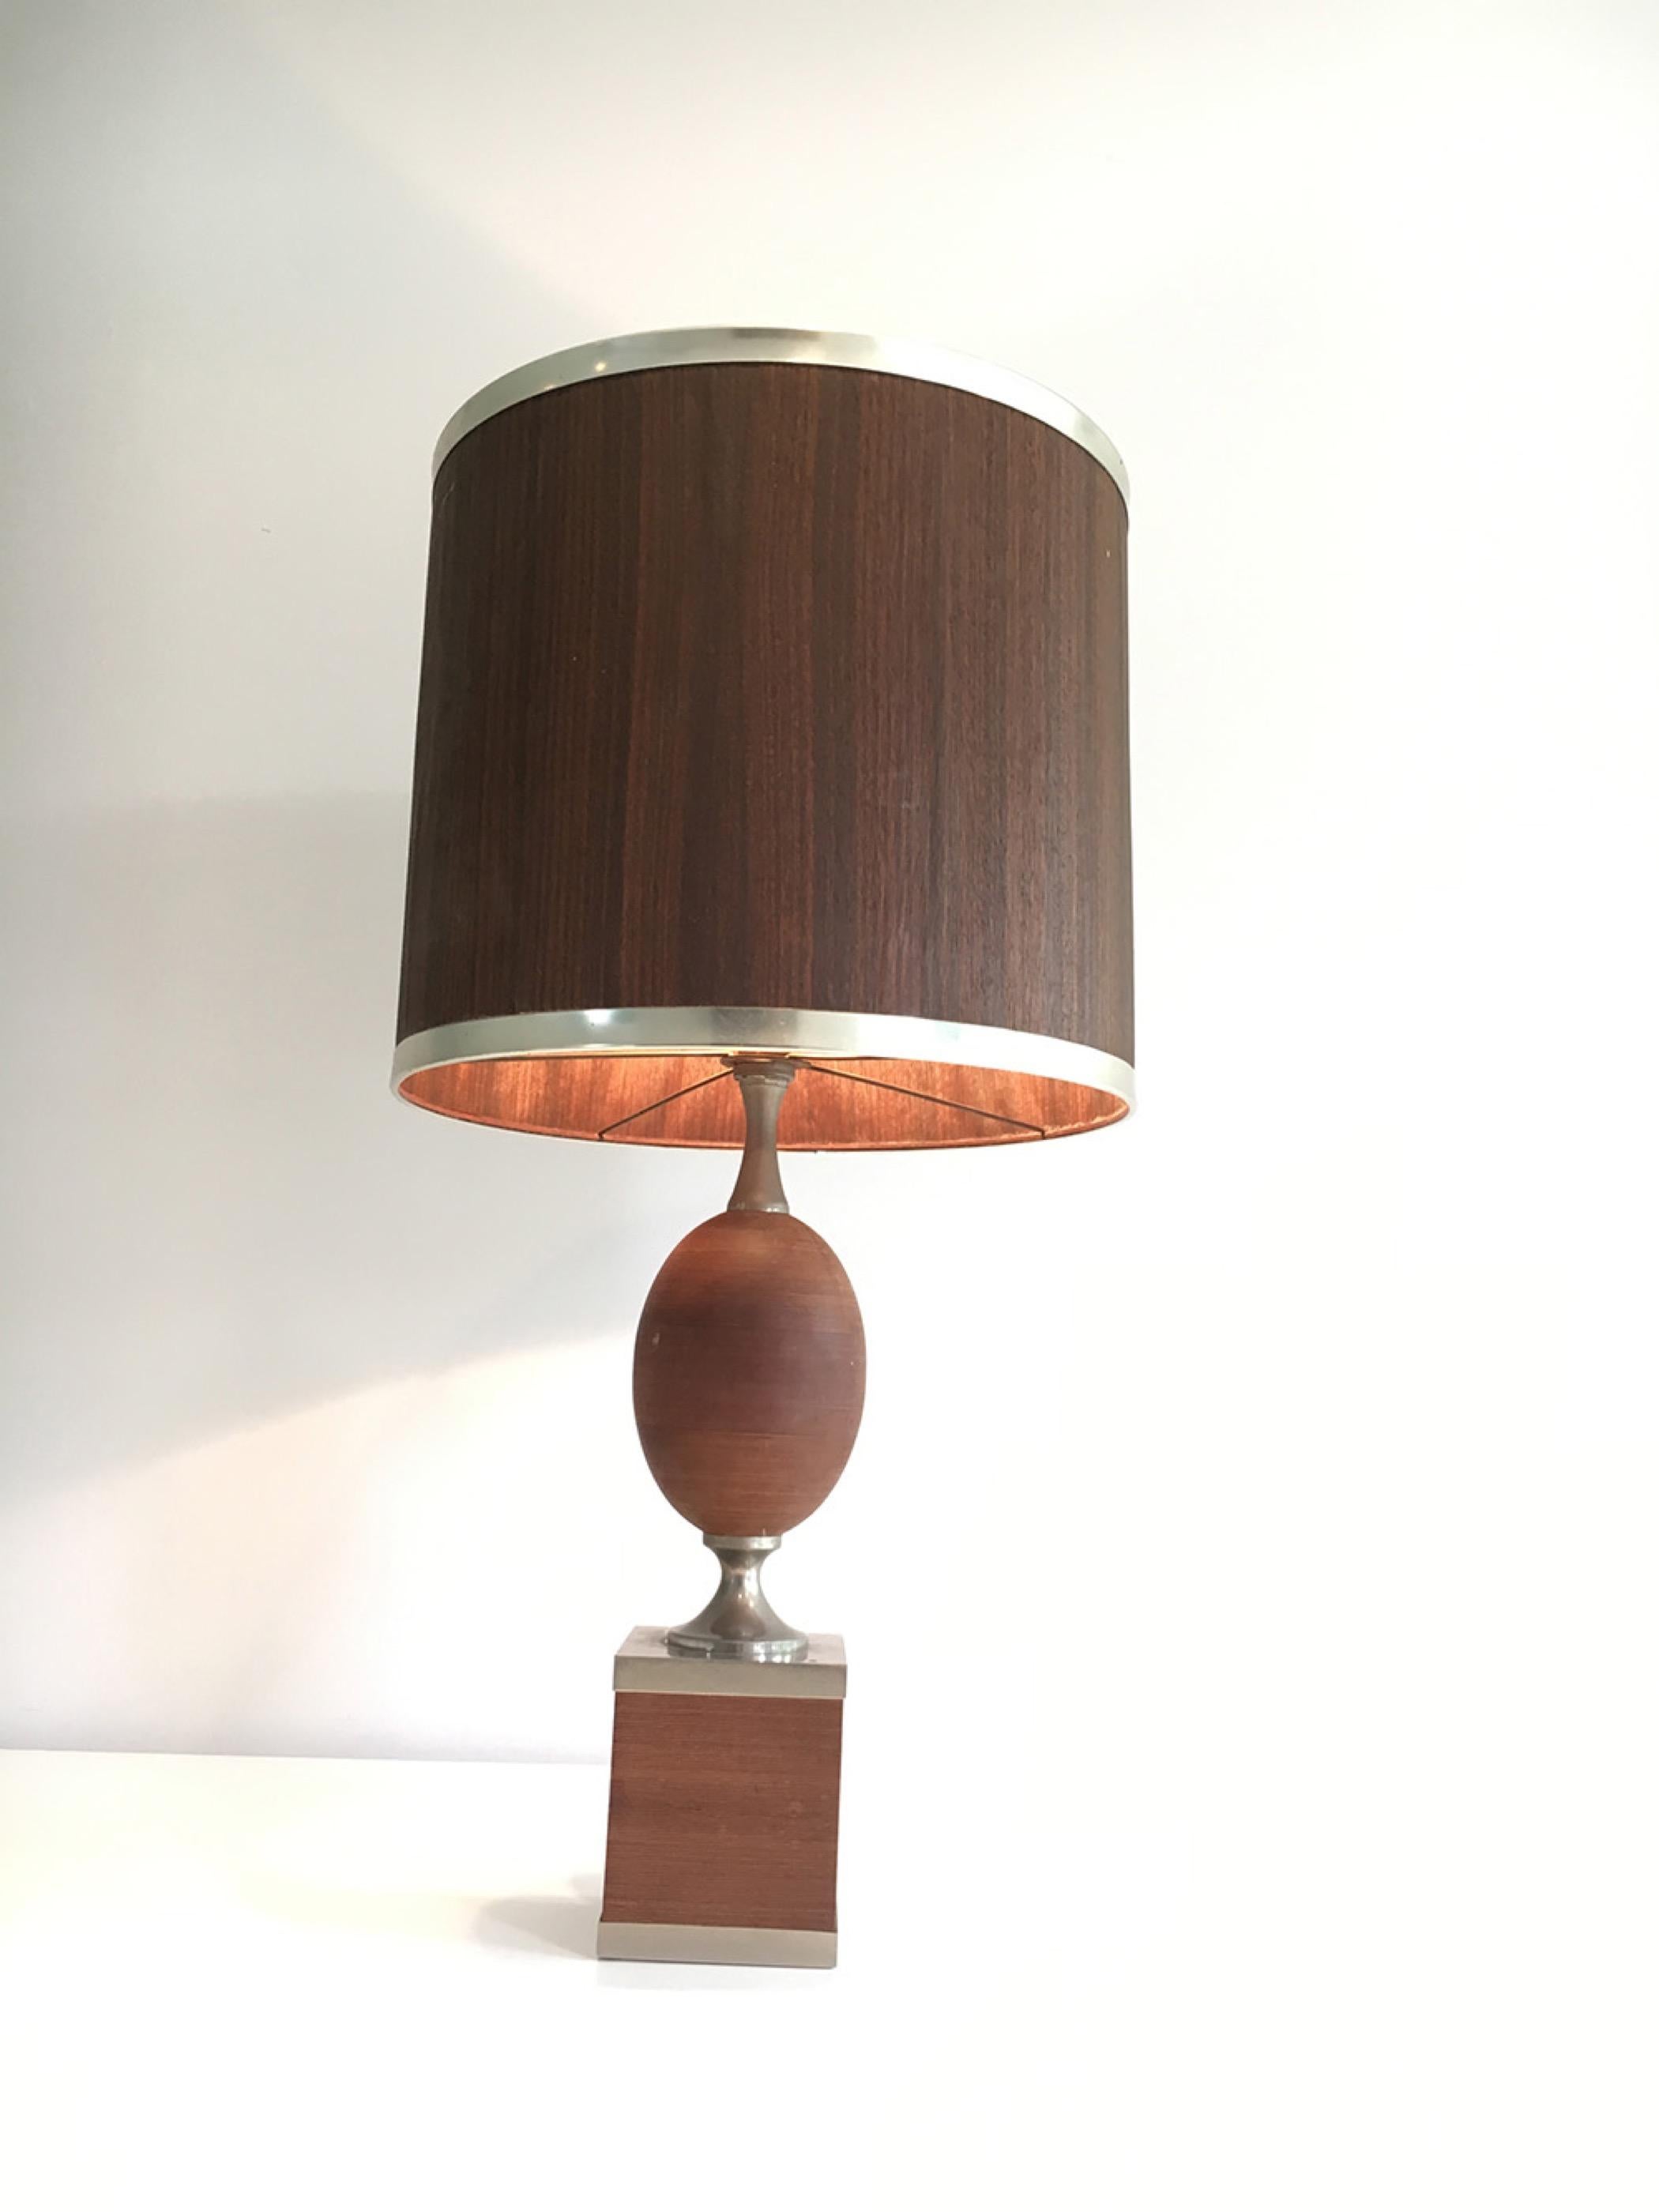 Wood and Brushed Steel Egg Lamp with Wooden Shade, circa 1970 For Sale 8